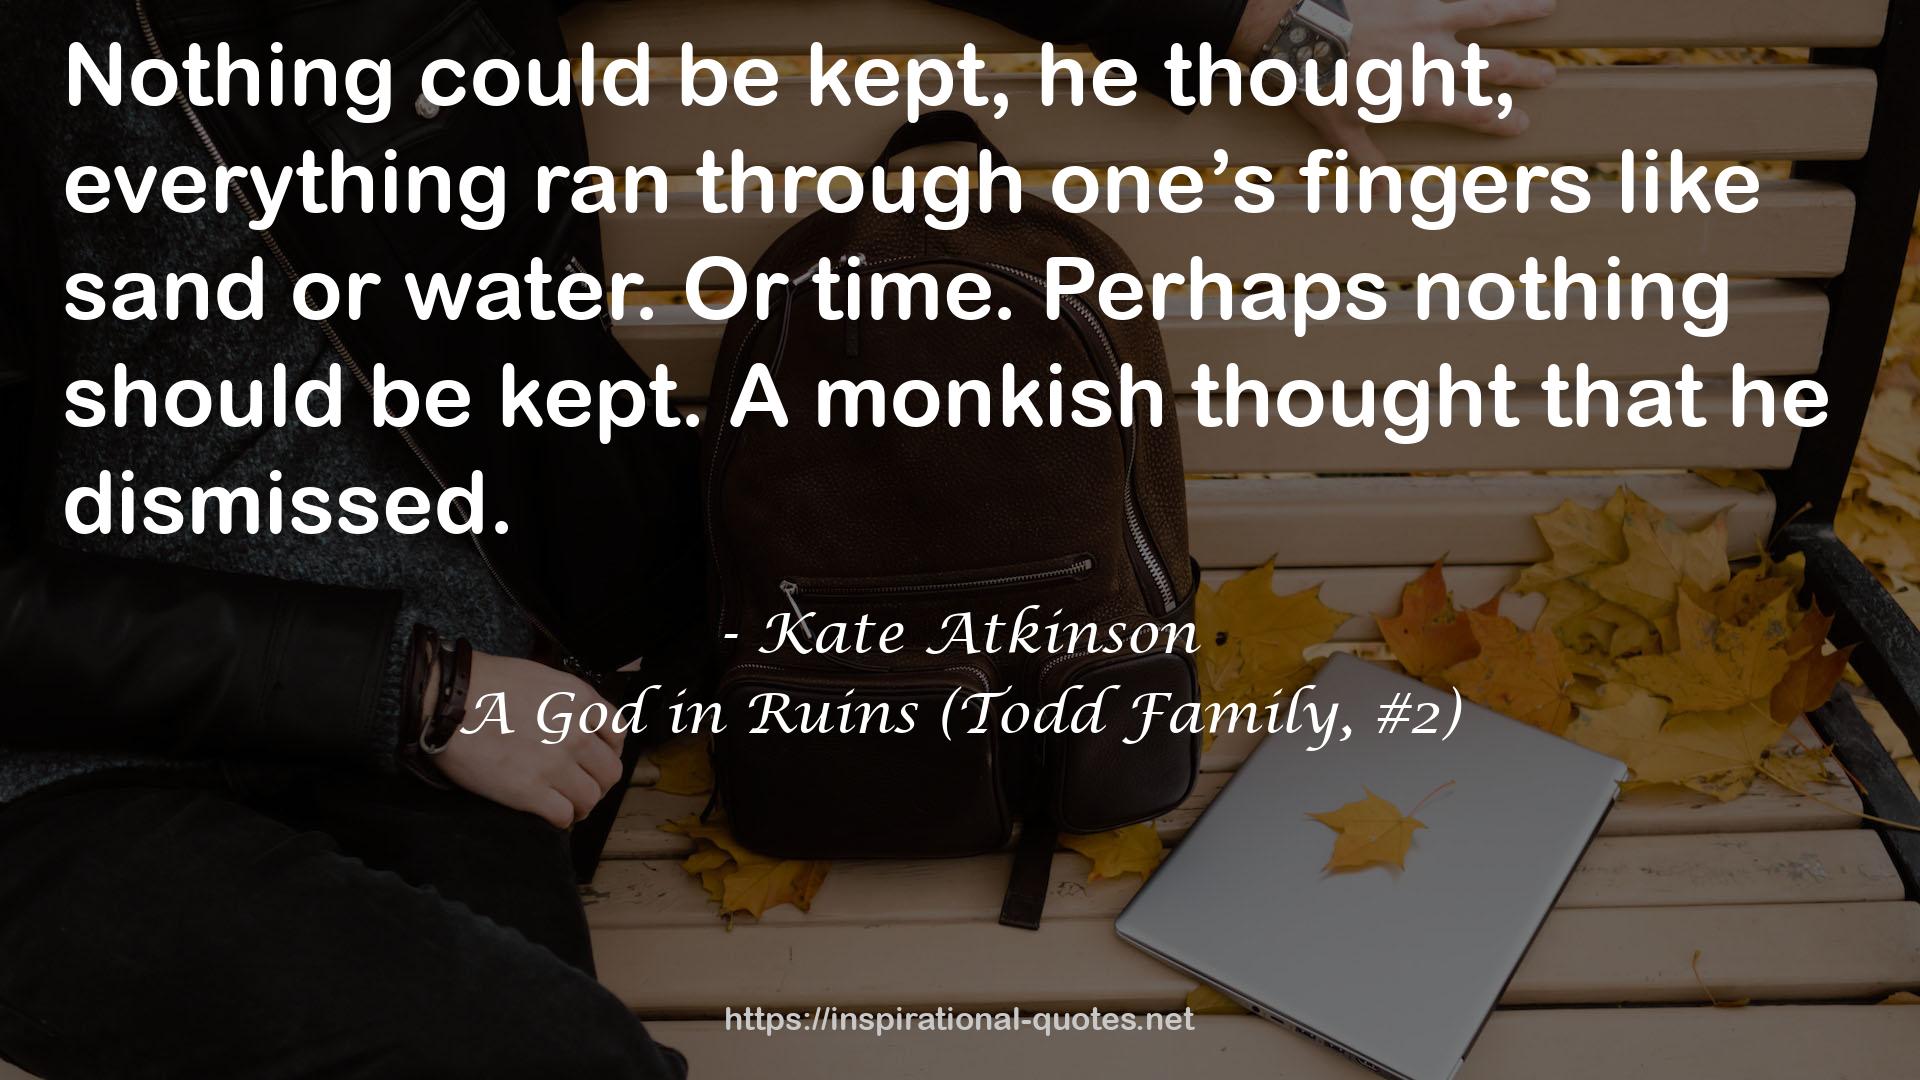 A God in Ruins (Todd Family, #2) QUOTES